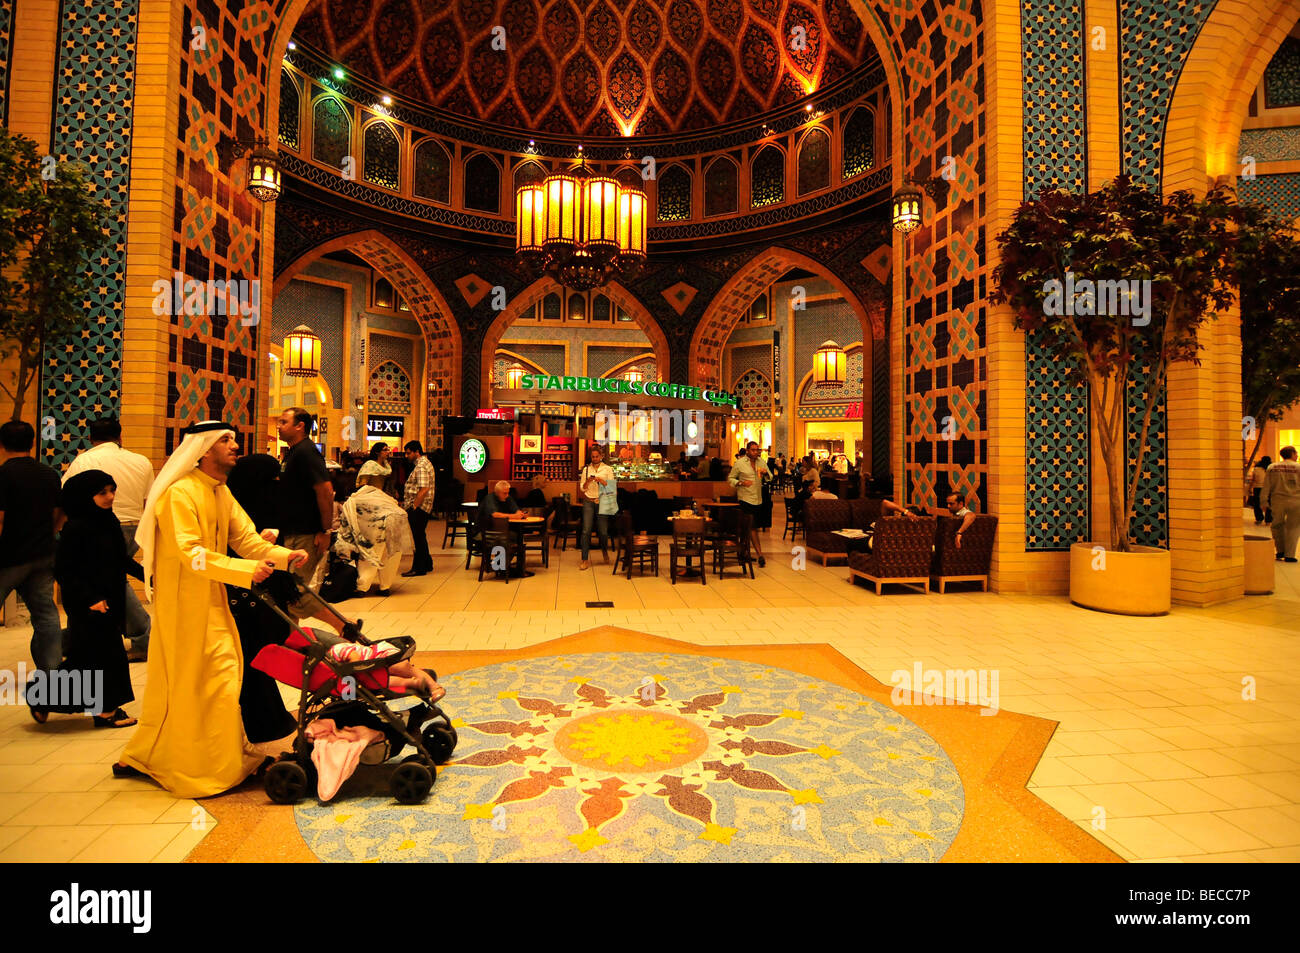 Shopping tourists in front of an elaborately decorated arch in the Persian part of the Ibn Battuta Mall, Dubai, United Arab Emi Stock Photo